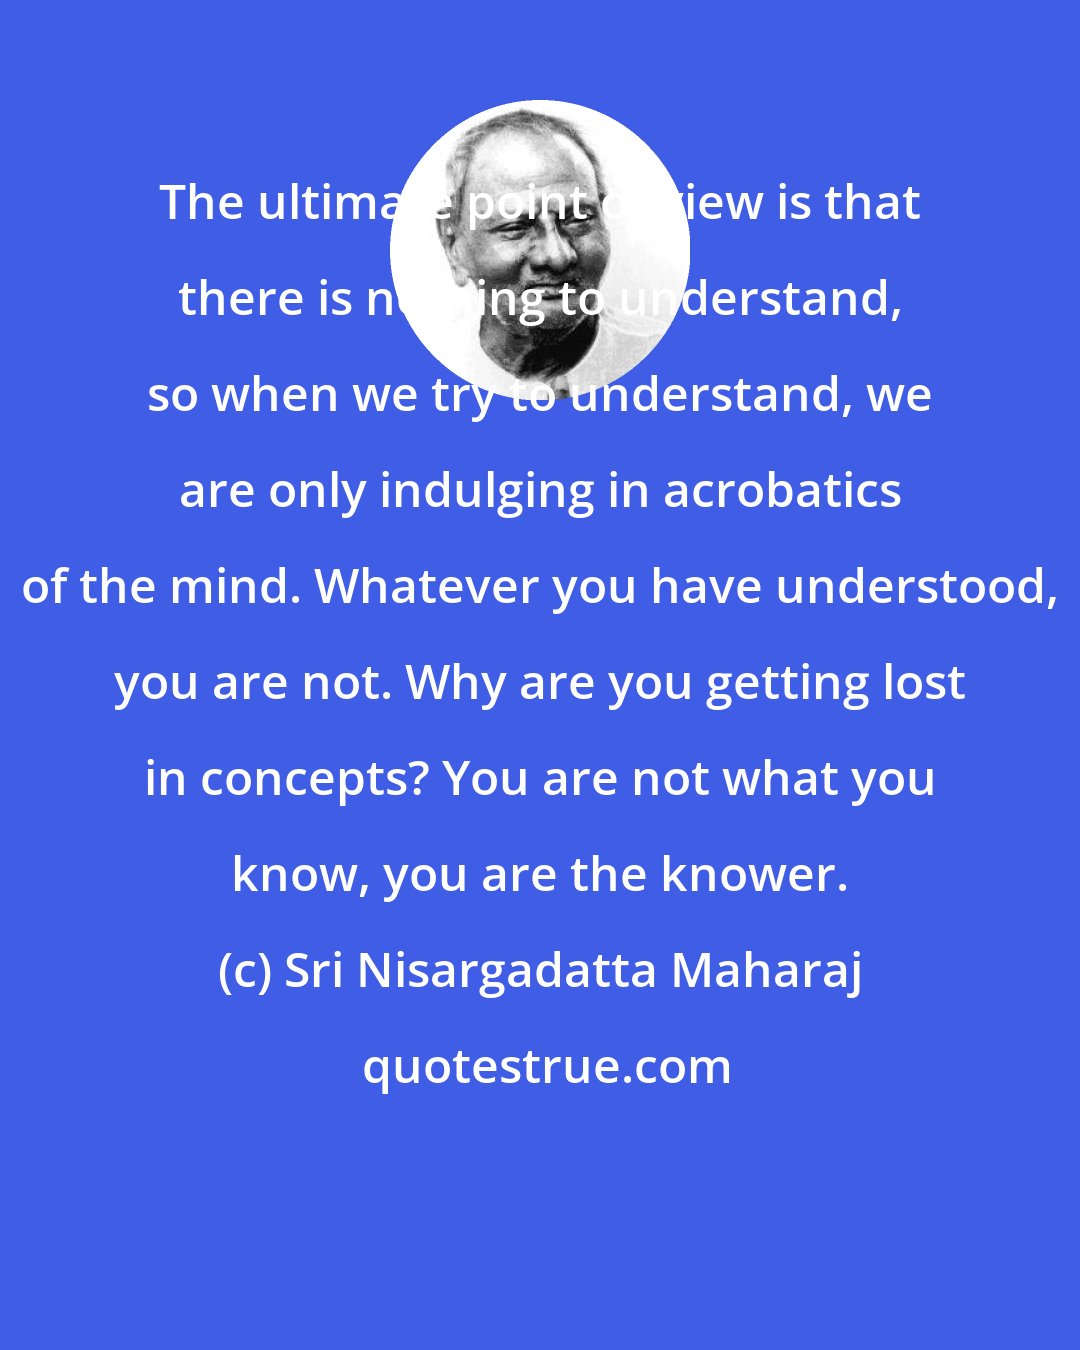 Sri Nisargadatta Maharaj: The ultimate point of view is that there is nothing to understand, so when we try to understand, we are only indulging in acrobatics of the mind. Whatever you have understood, you are not. Why are you getting lost in concepts? You are not what you know, you are the knower.